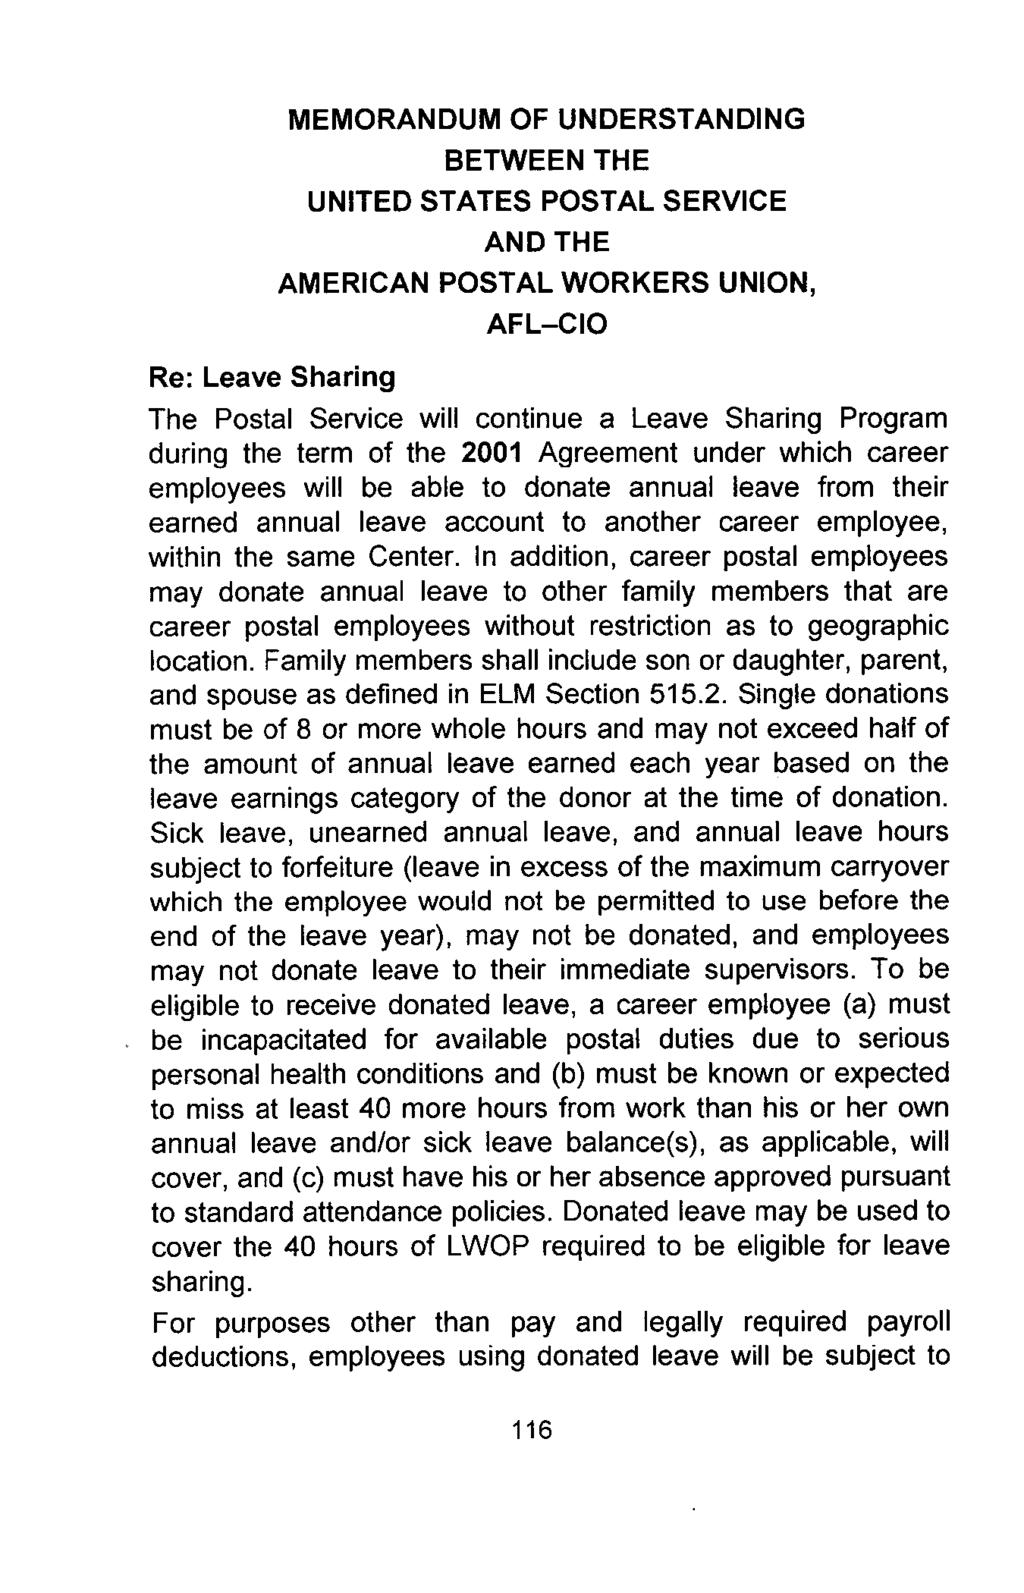 MEMORANDUM OF UNDERSTANDING BETWEEN THE UNITED STATES POSTAL SERVICE AND THE AMERICAN POSTAL WORKERS UNION, AFL-CIO Re : Leave Sharing The Postal Service will continue a Leave Sharing Program during